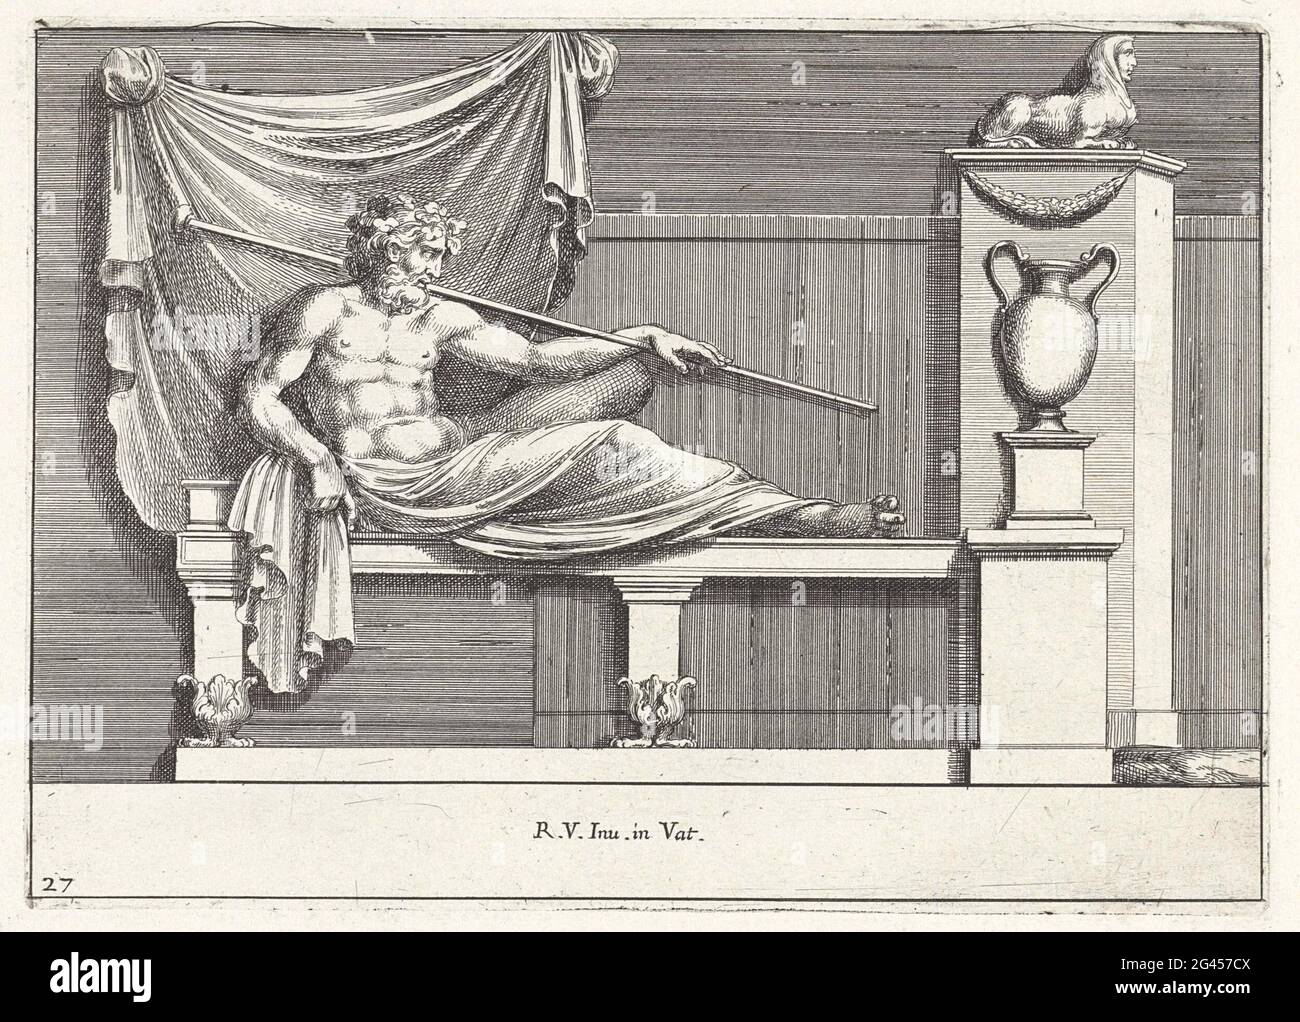 Lying man; Reliefs in the Loggia of Rafael. A man lying on a bed with a curtain behind him. On the right a vase and an image of a sphinx. Stock Photo